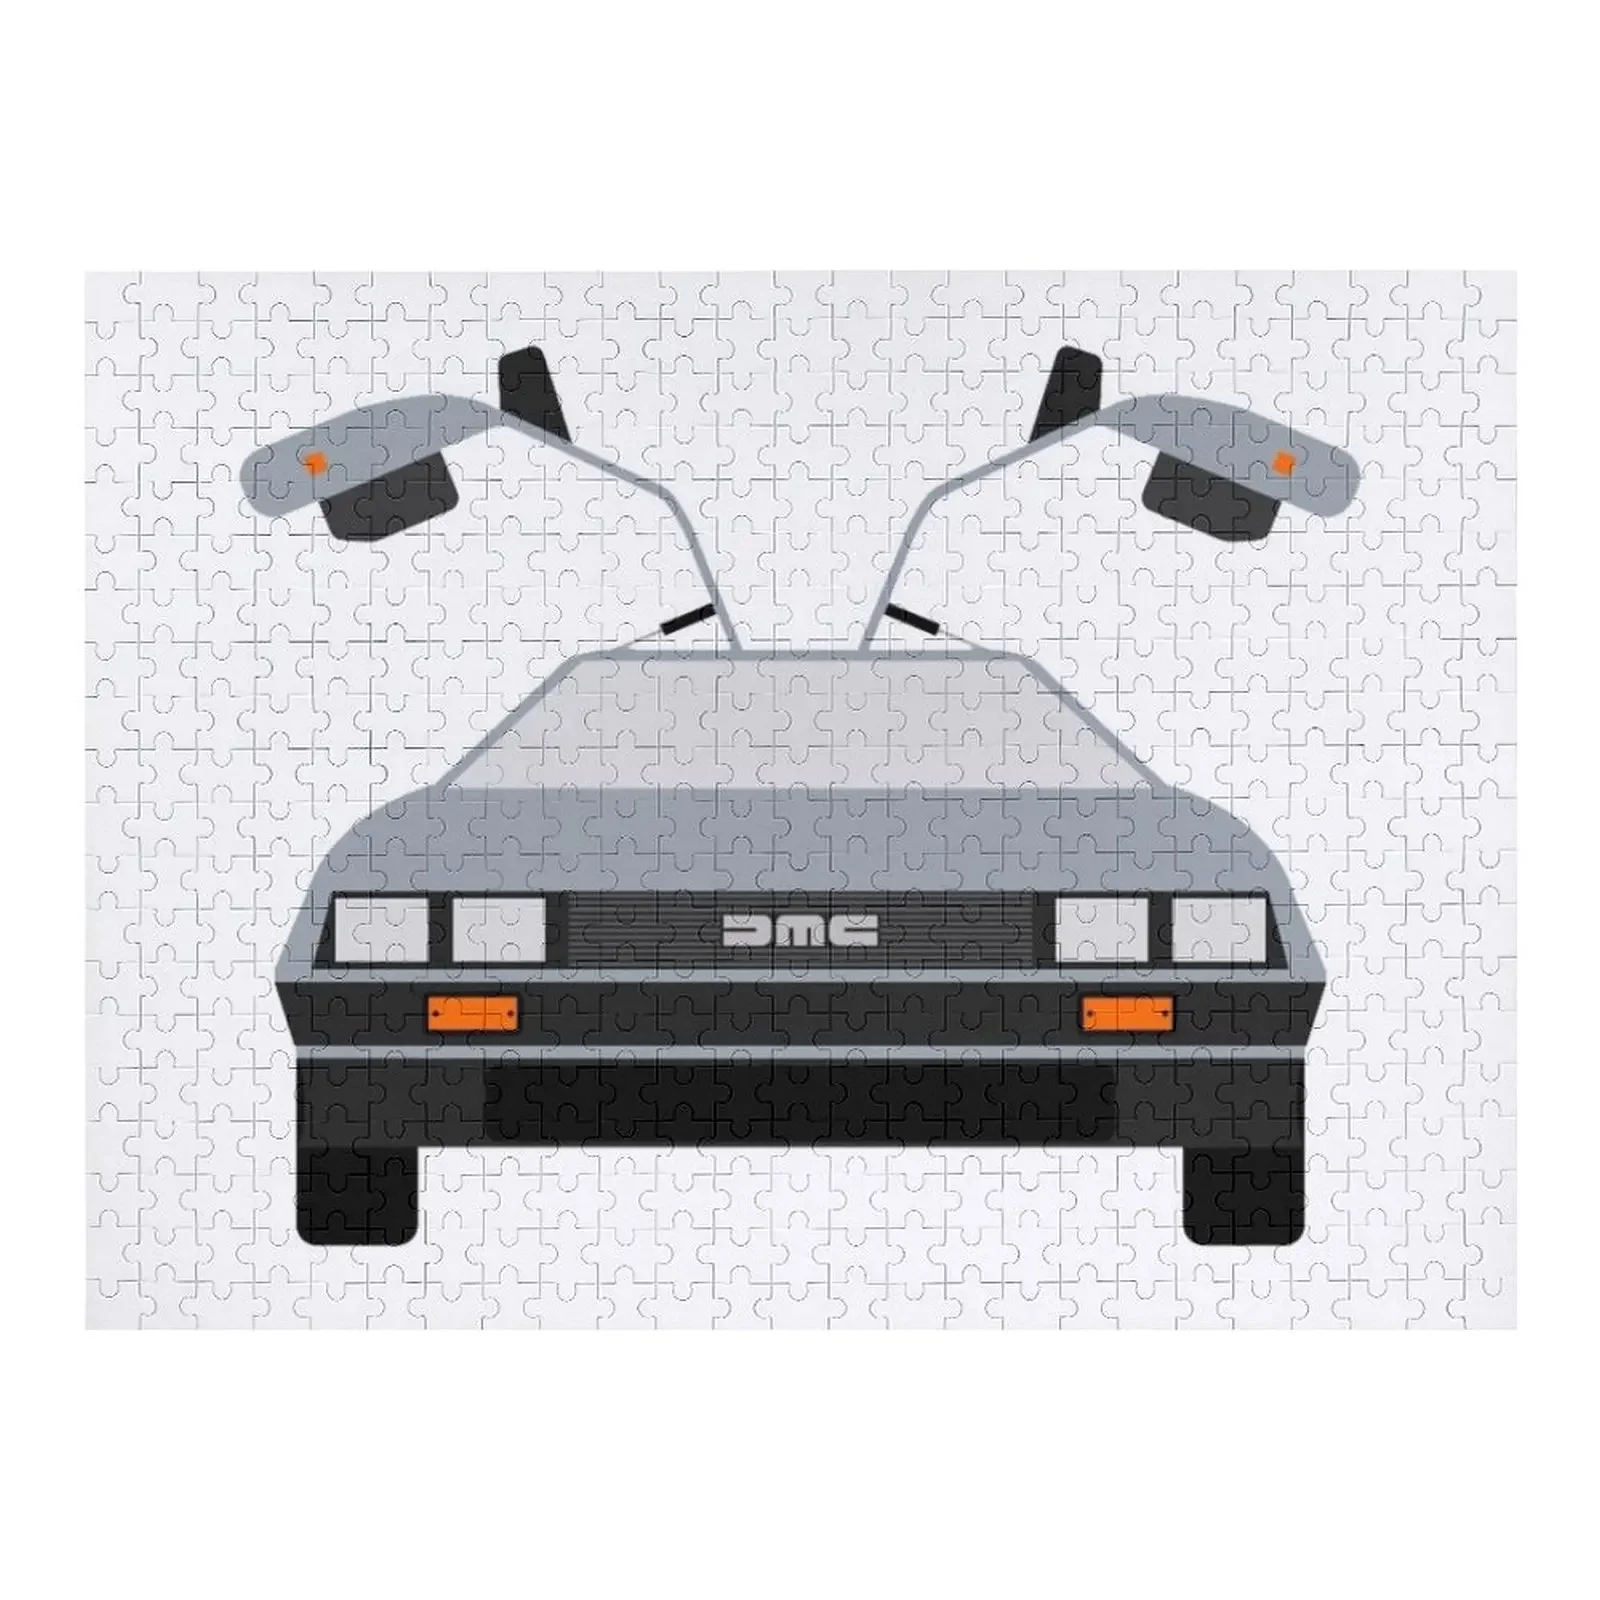 Delorean Back to the future Jigsaw Puzzle Scale Motors Customized Photo Customizable Gift Puzzle 1981 de lorean gold edition back to the future 1 18 scale diecast model car